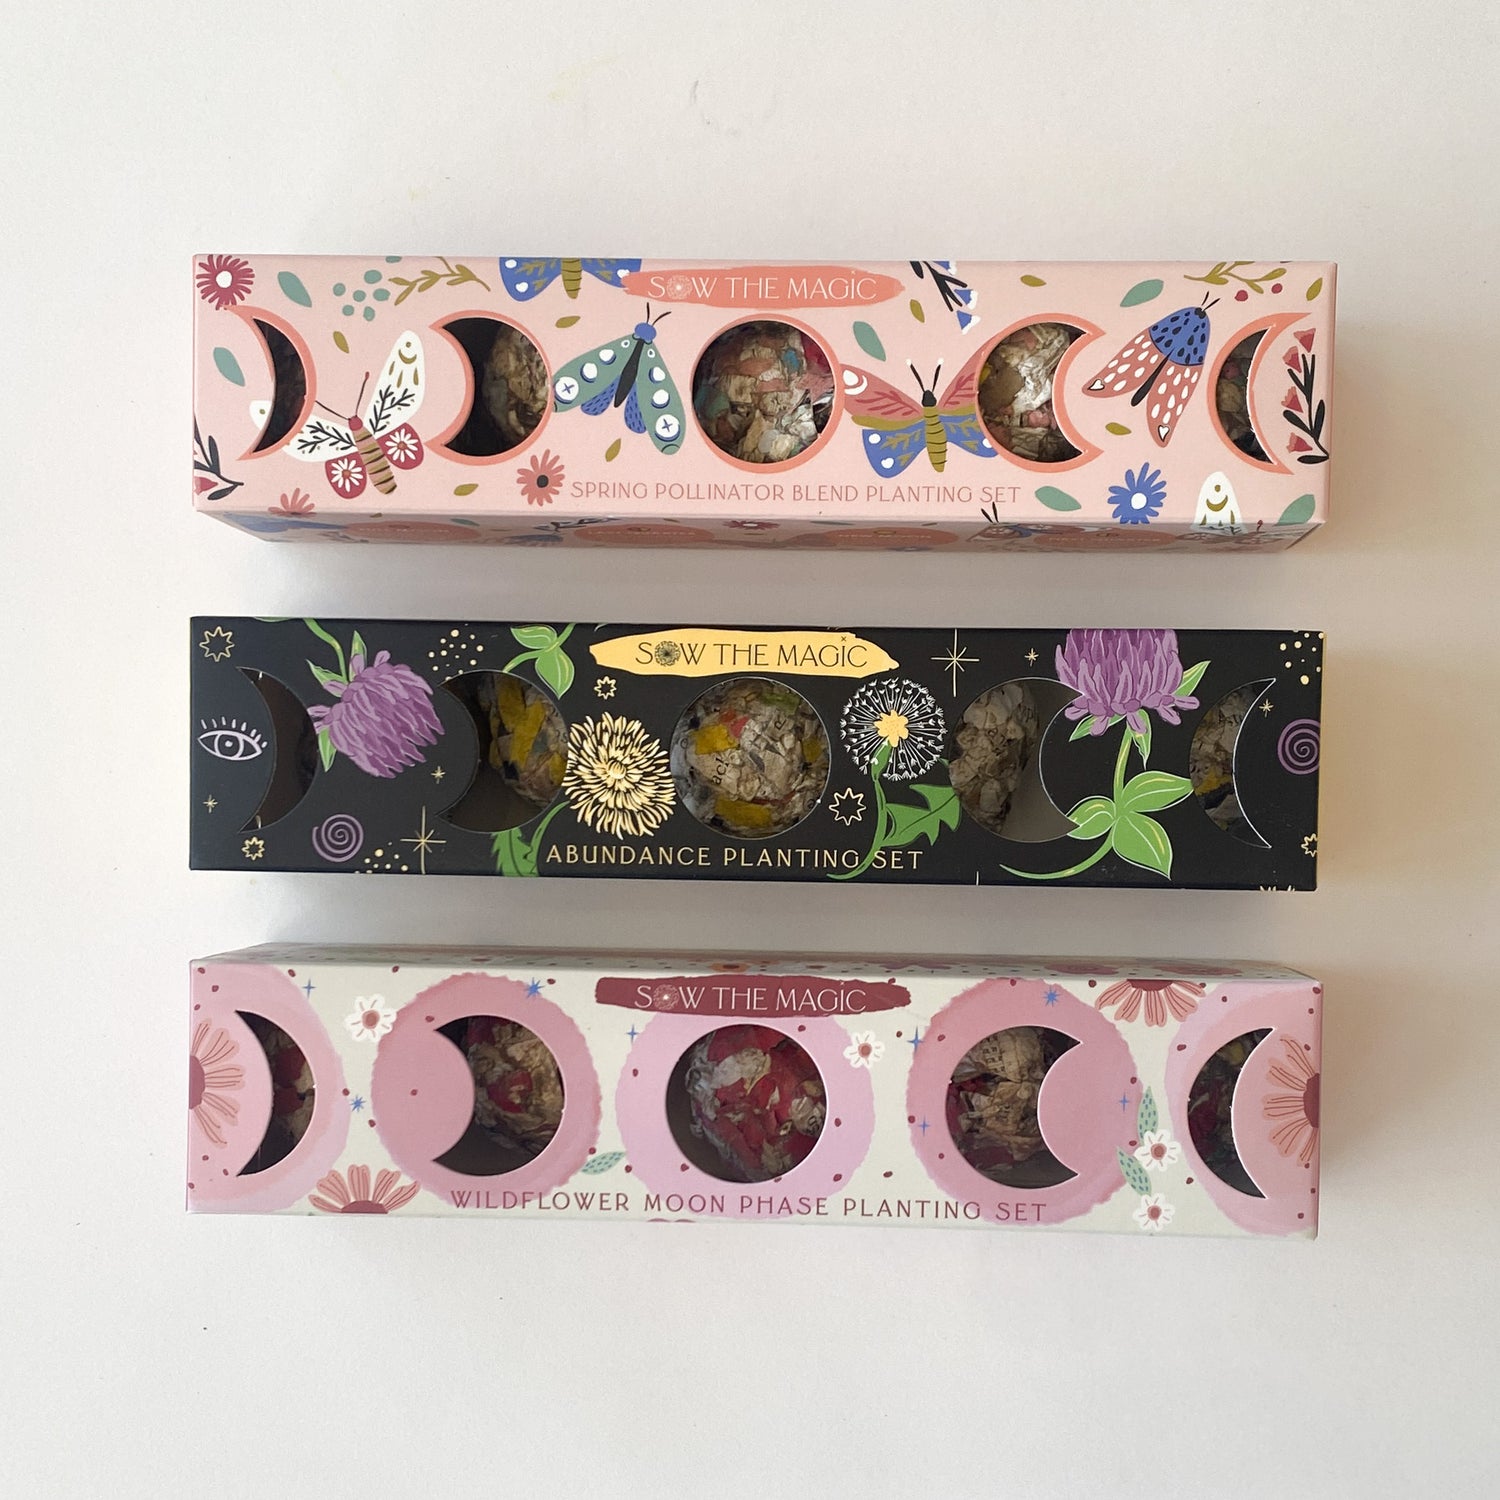 Seed Ball Planting Sets by Sow The Magic